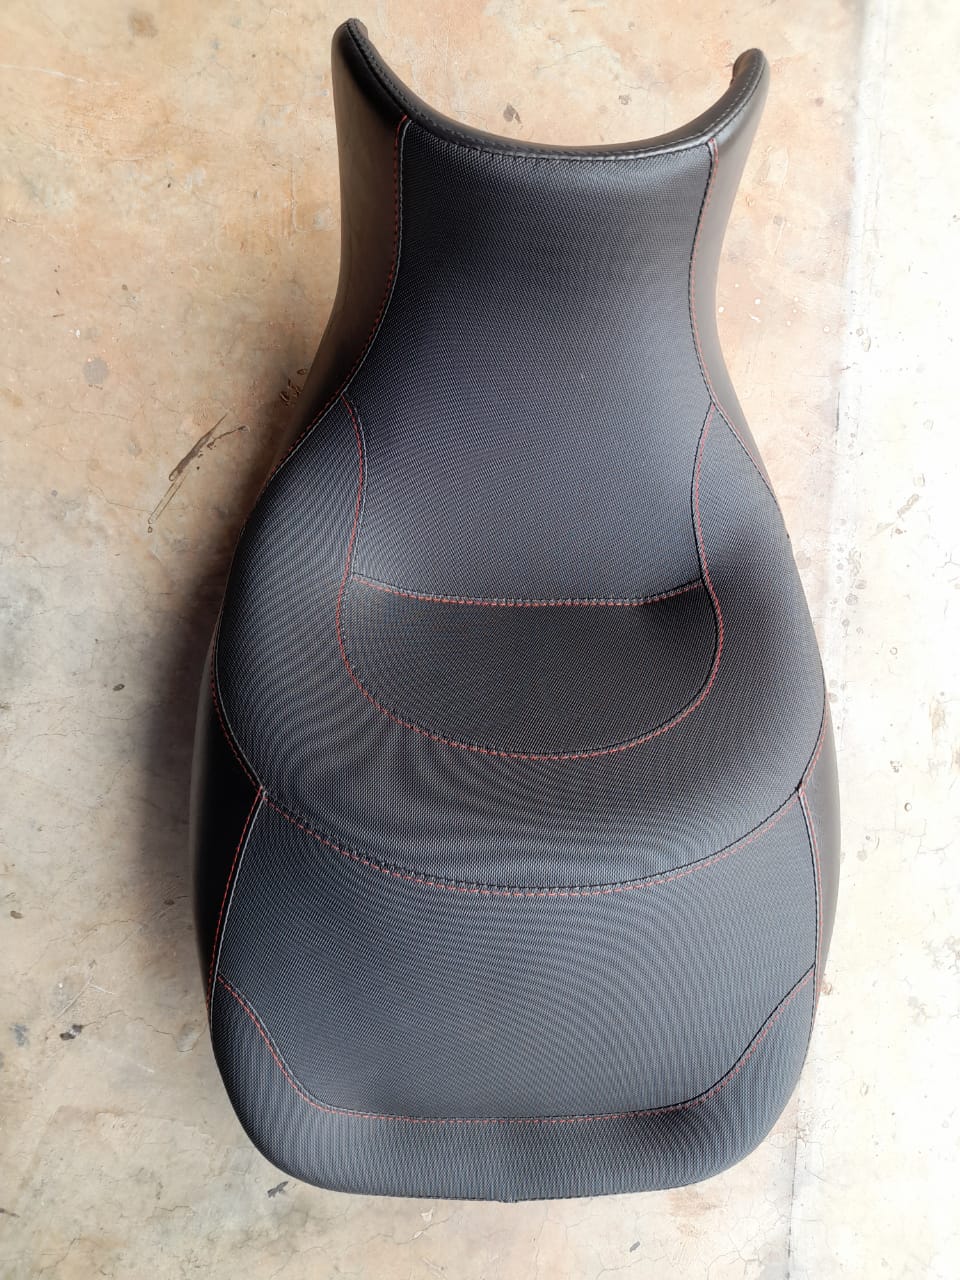 1 x BMW Seat for K1600GTL or K1600GT for sale